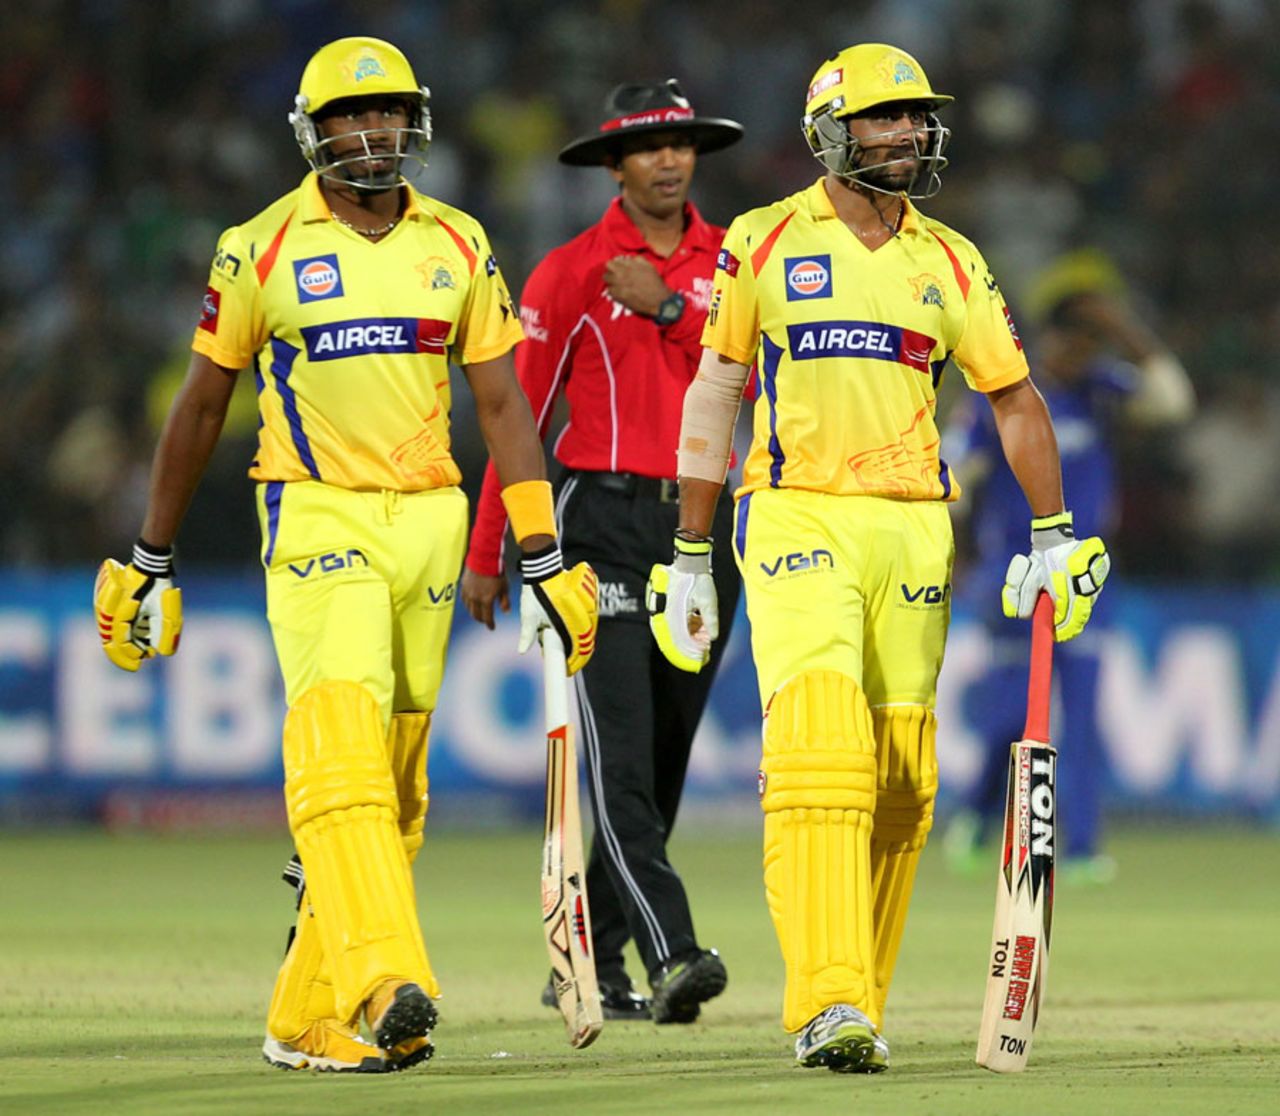 Dwayne Bravo and Ravindra Jadeja added 28 runs in quick time in the last two overs, Rajasthan Royals v Chennai Super Kings, IPL 2013, Jaipur, May 12, 2013
